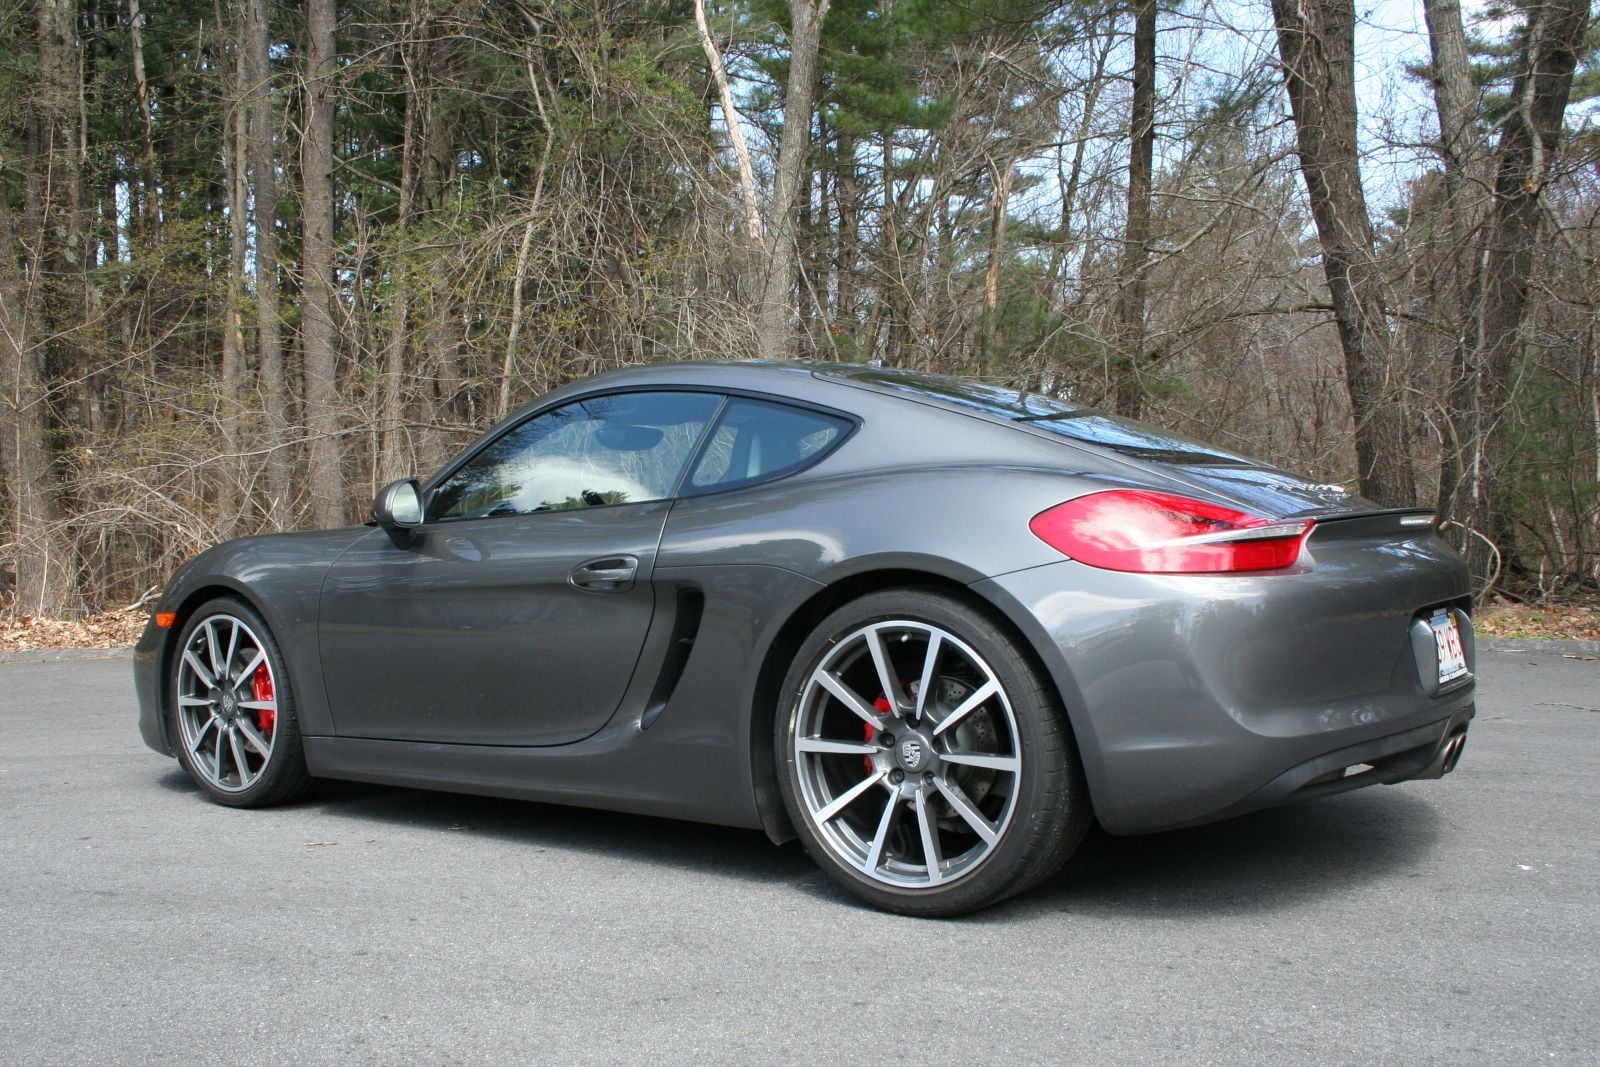 2014 Porsche Cayman -  - Used - VIN WP0AB2A87EK191328 - 14,073 Miles - 6 cyl - 2WD - Automatic - Coupe - Gray - Billerica, MA 01821, United States